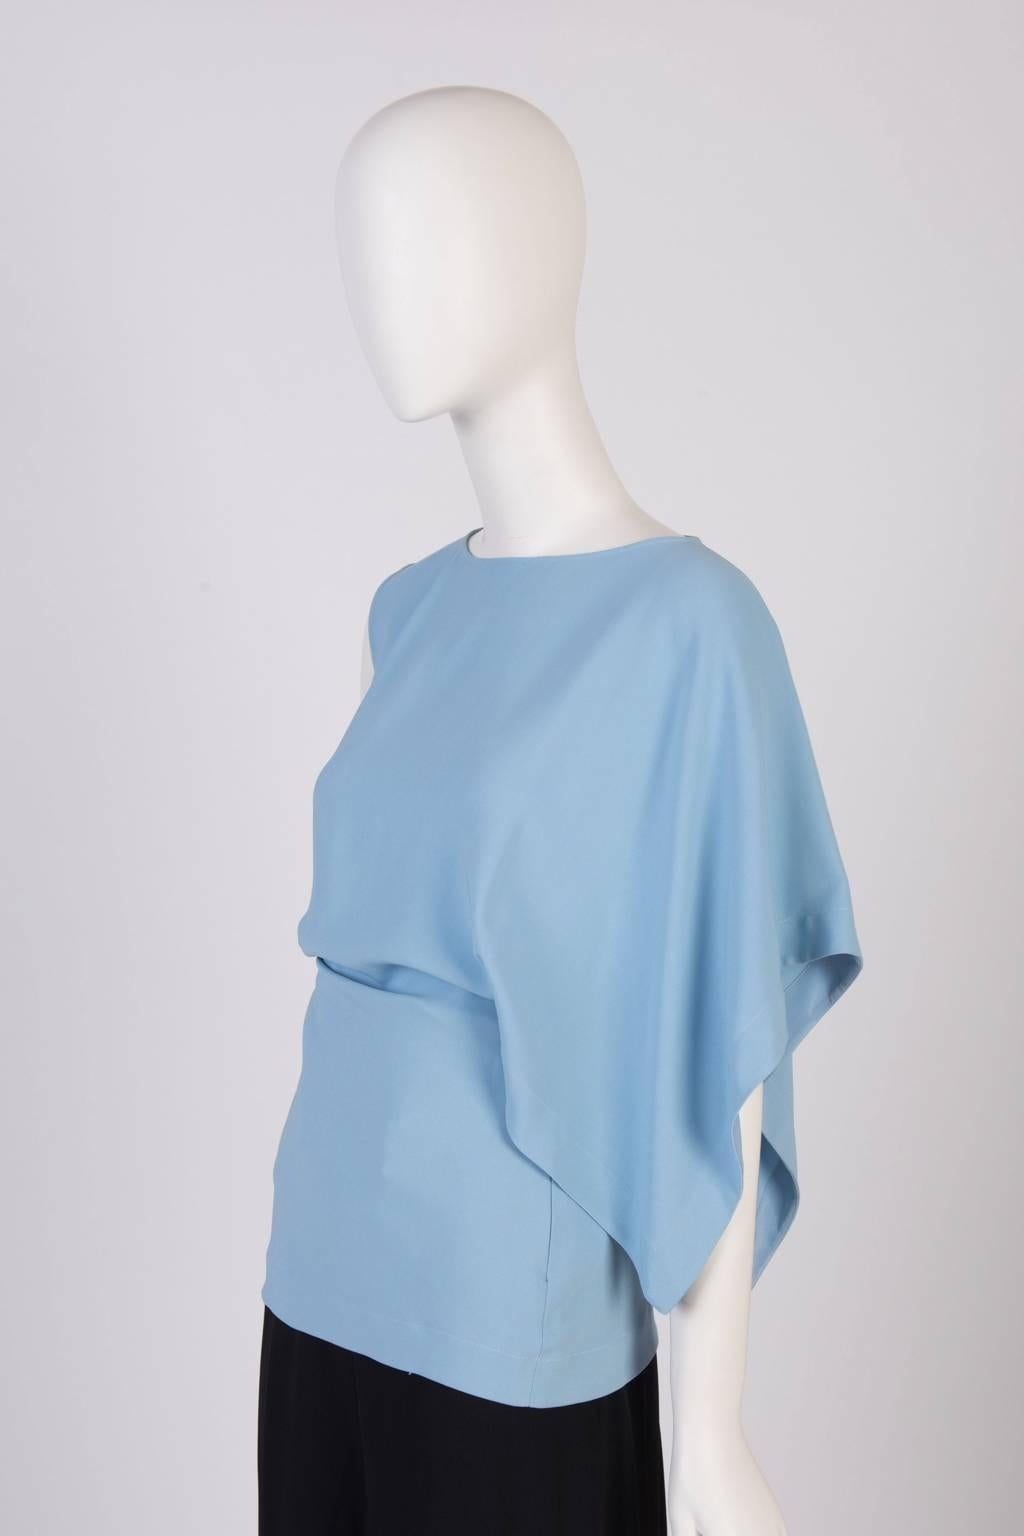 A modern and fluid Vionnet bias cut top featuring one open sleeve design with side zip fasterning. 